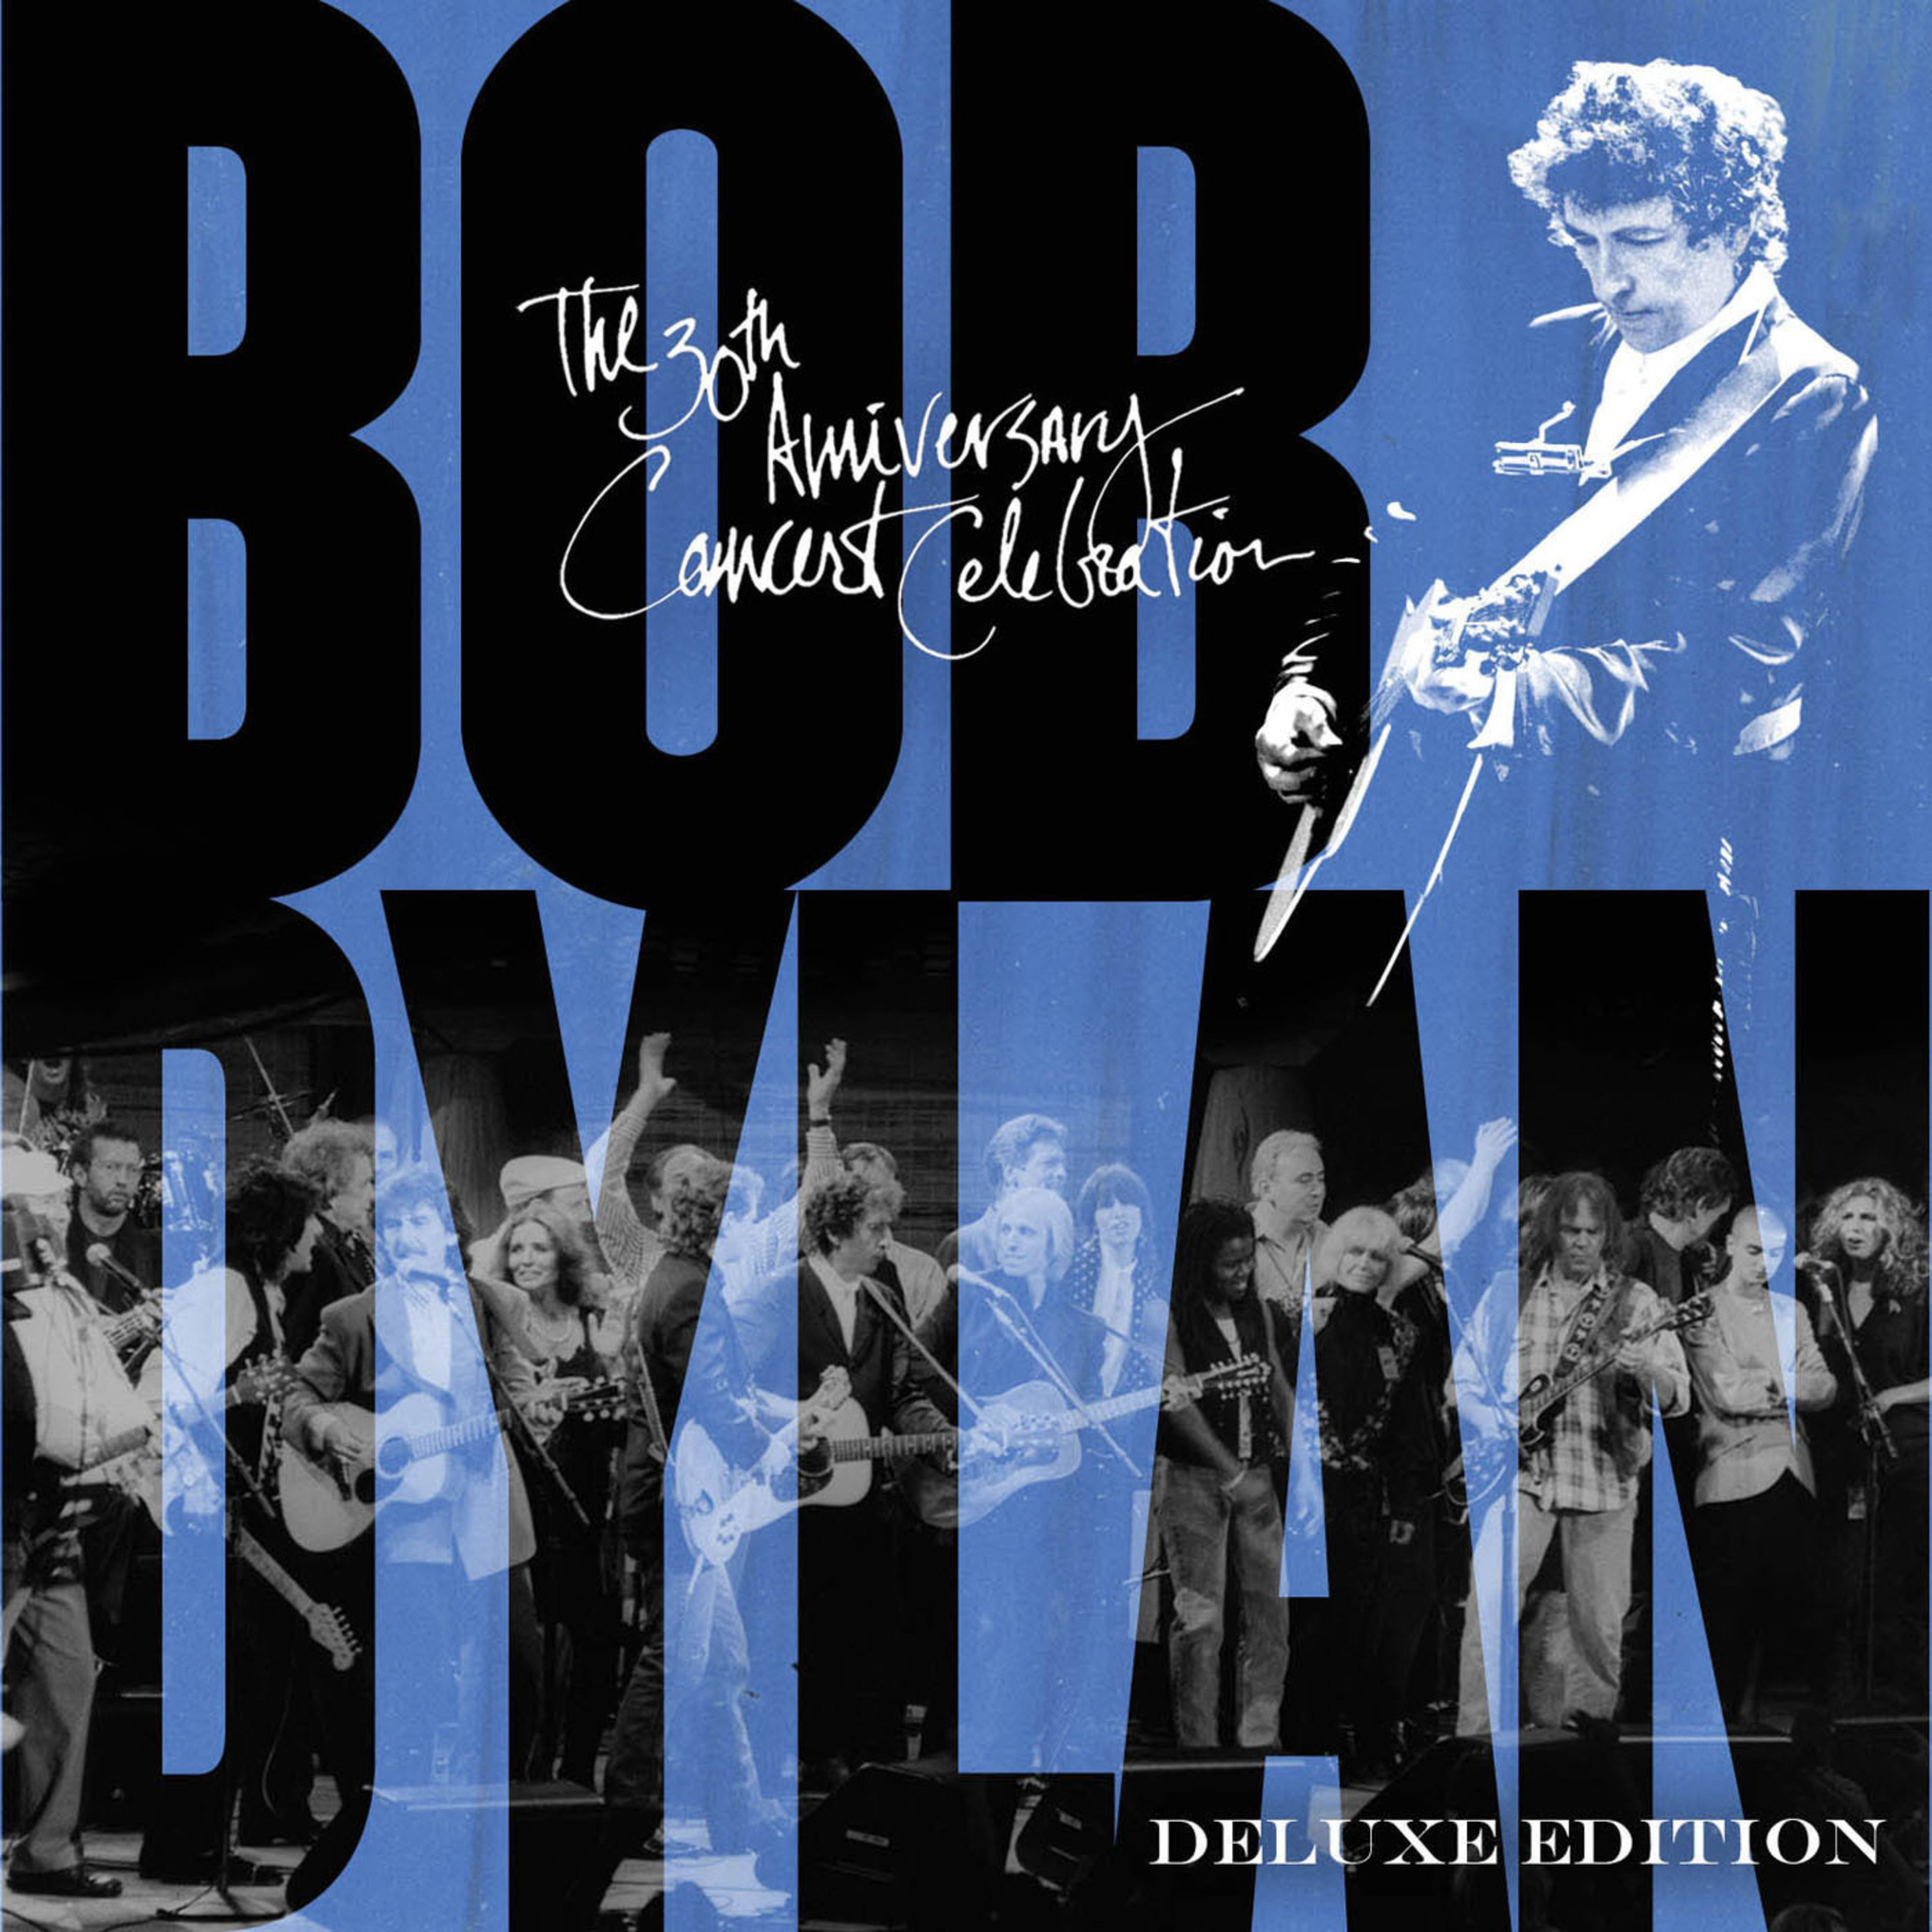 Bob Dylan "The 30th Anniversary Concert Celebration - Deluxe Edition" to be released March 4. (PRNewsFoto/Legacy Recordings) (PRNewsFoto/LEGACY RECORDINGS)